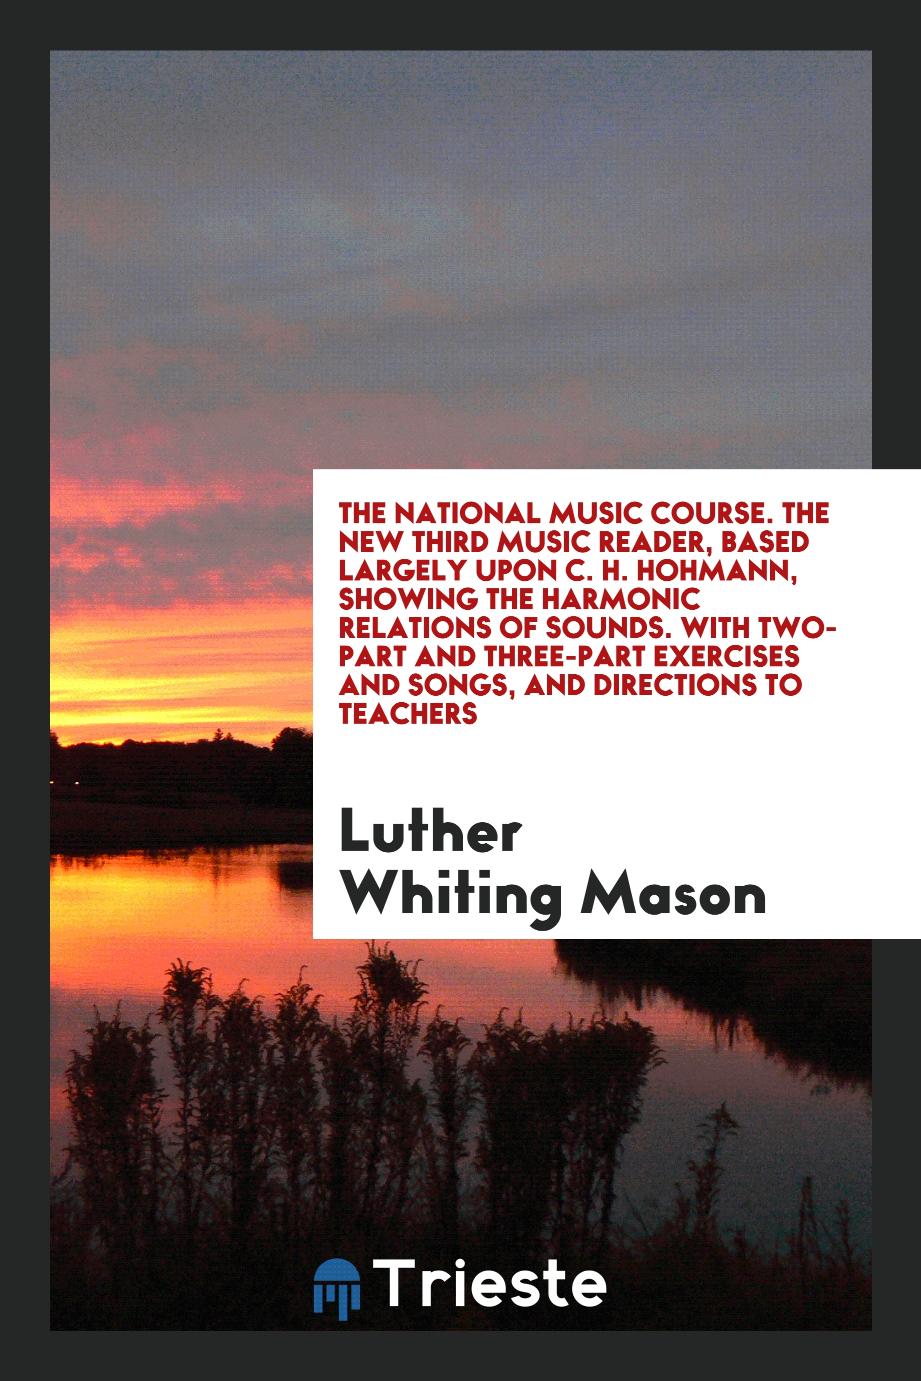 The National Music Course. The New Third Music Reader, Based Largely upon C. H. Hohmann, Showing the Harmonic Relations of Sounds. With Two-Part and Three-Part Exercises and Songs, and Directions to Teachers